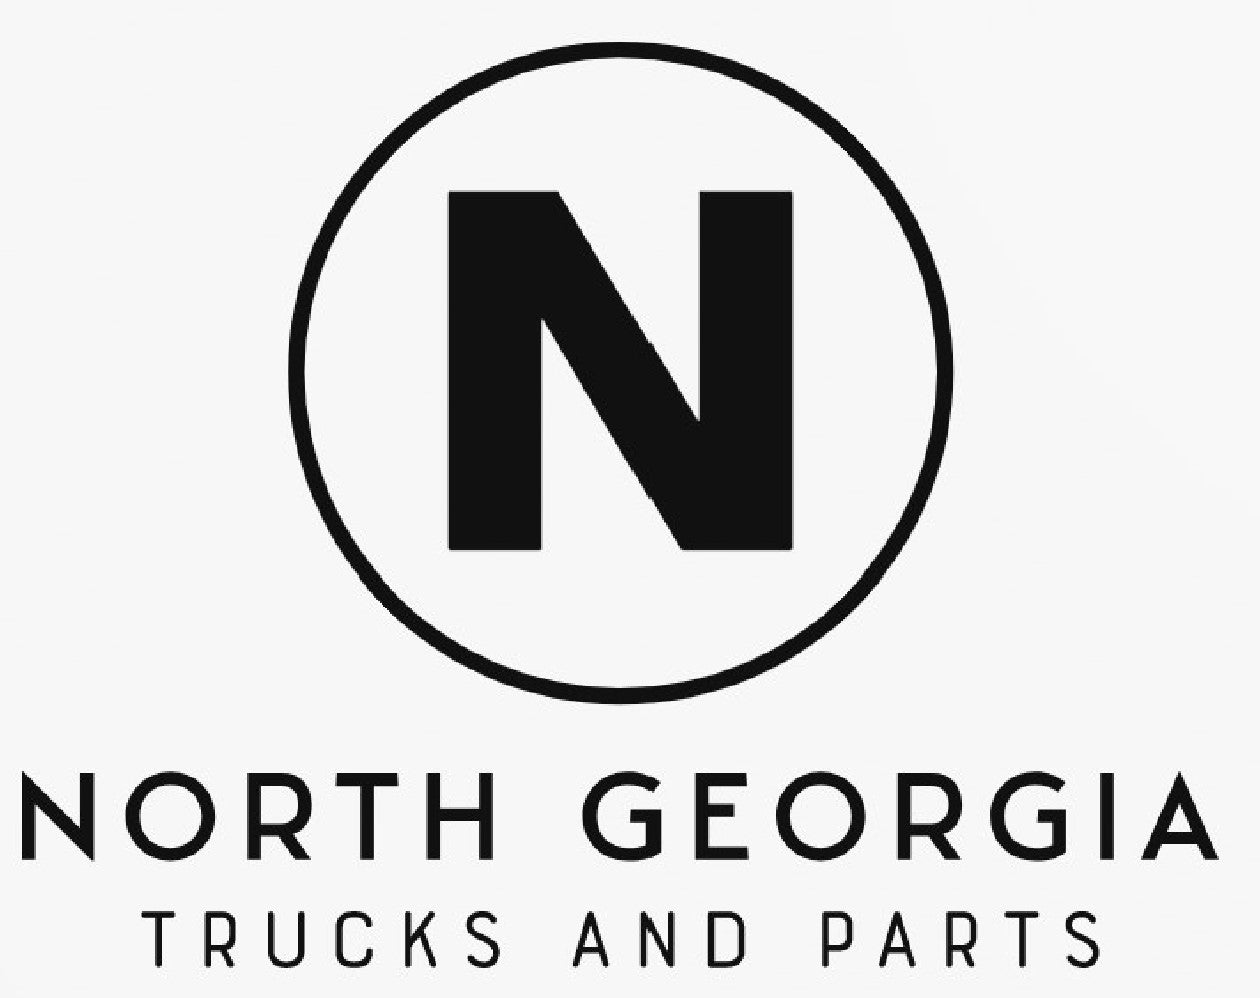 Barksdale Truck Parts - North Georgia Trucks and Parts